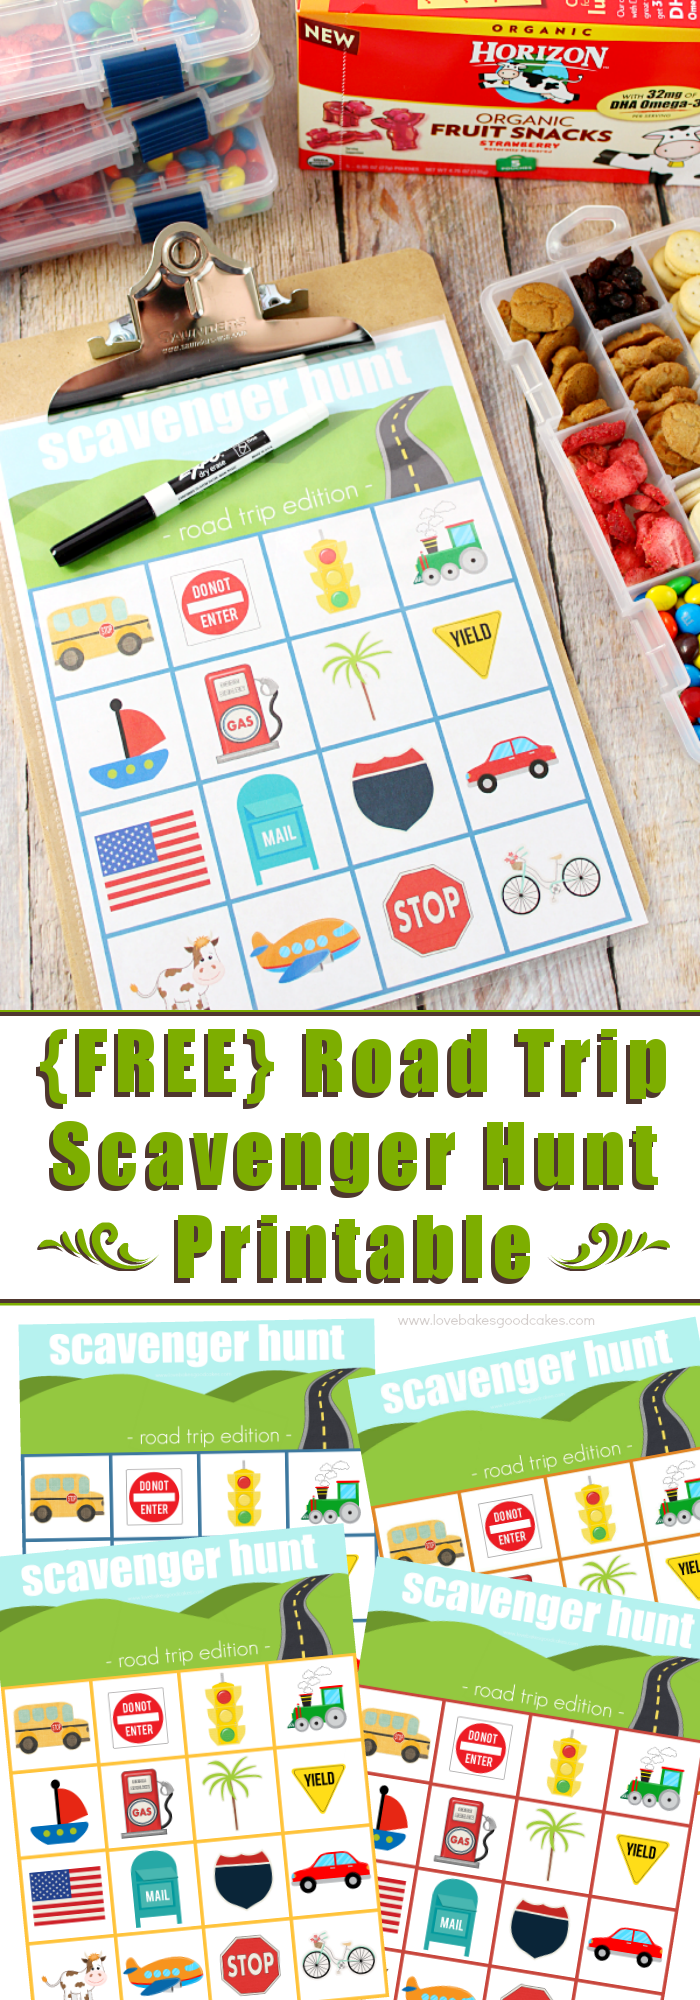 No road trip is complete without car games and snacks! Download this Road Trip Scavenger Hunt Printable and see how easy it is to make road trip snack boxes! #HorizonSnacks #ad